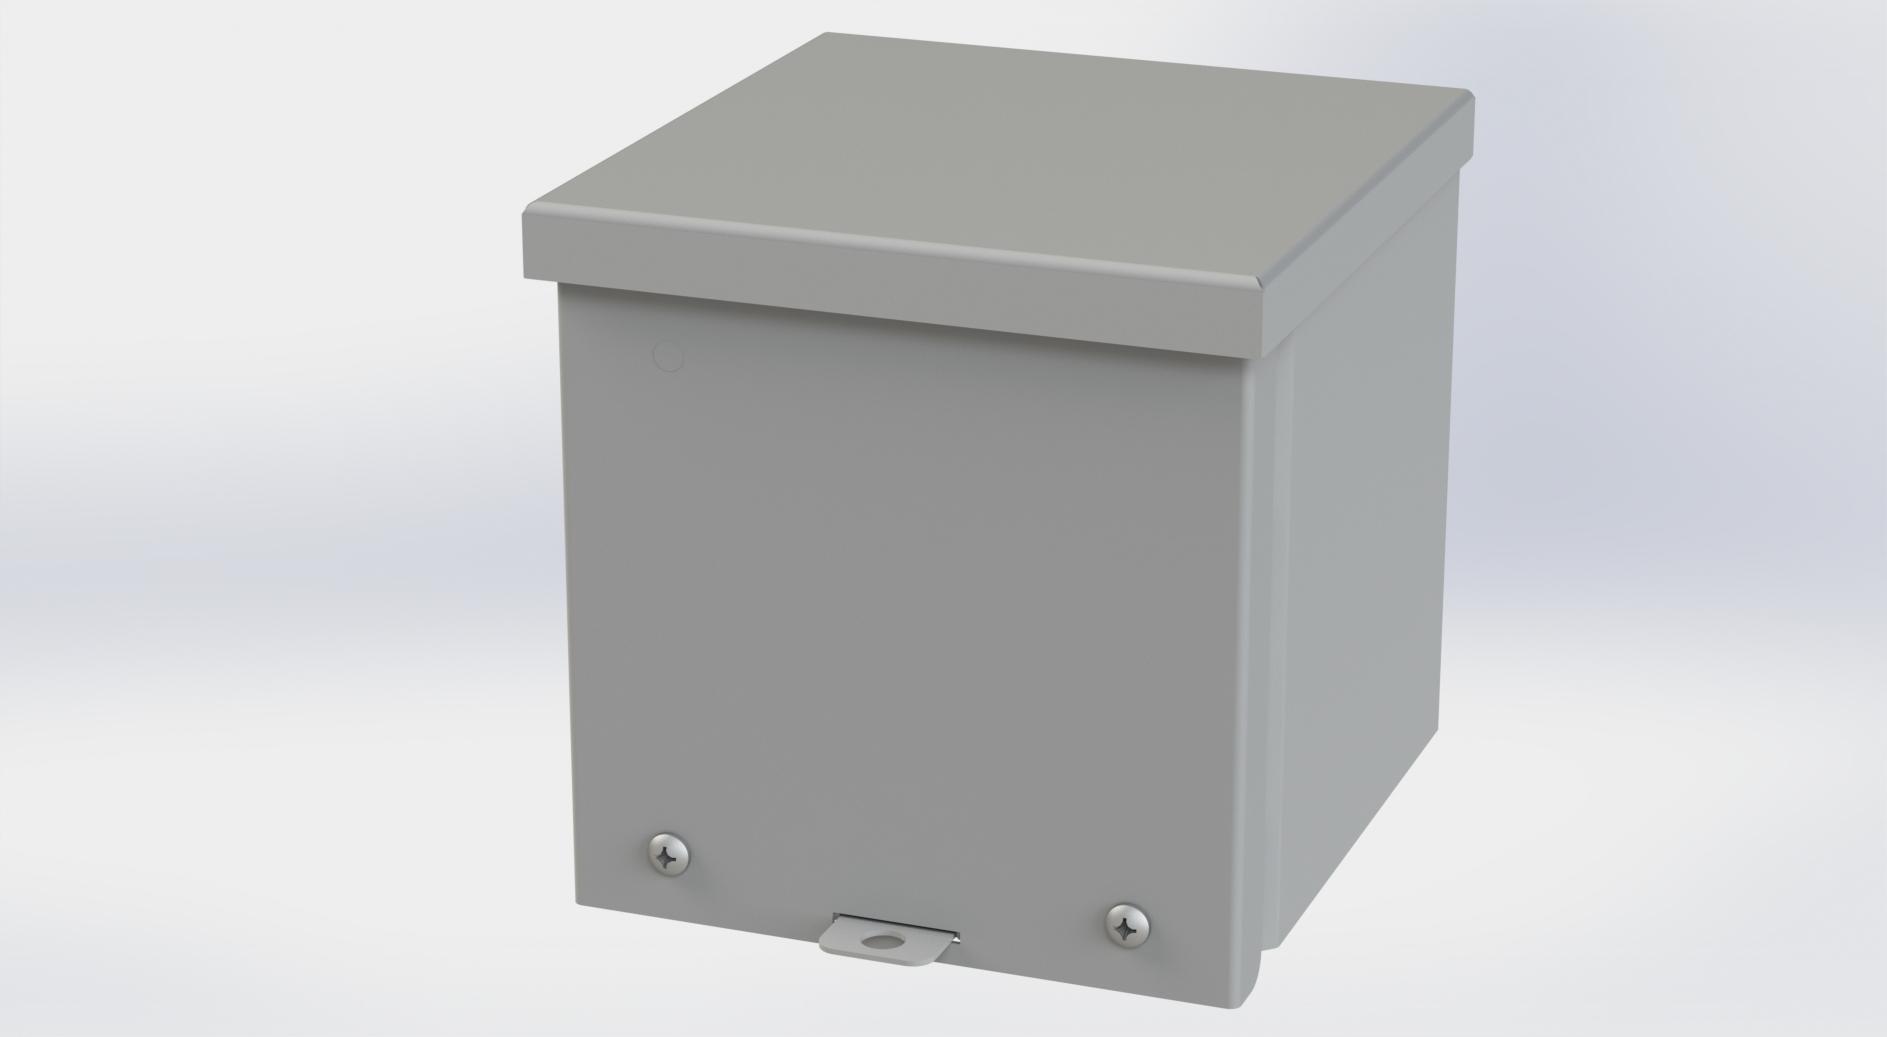 Saginaw Control SCE-6R66 Type-3R Screw Cover Enclosure, Height:6.00", Width:6.00", Depth:6.00", ANSI-61 gray powder coating inside and out.